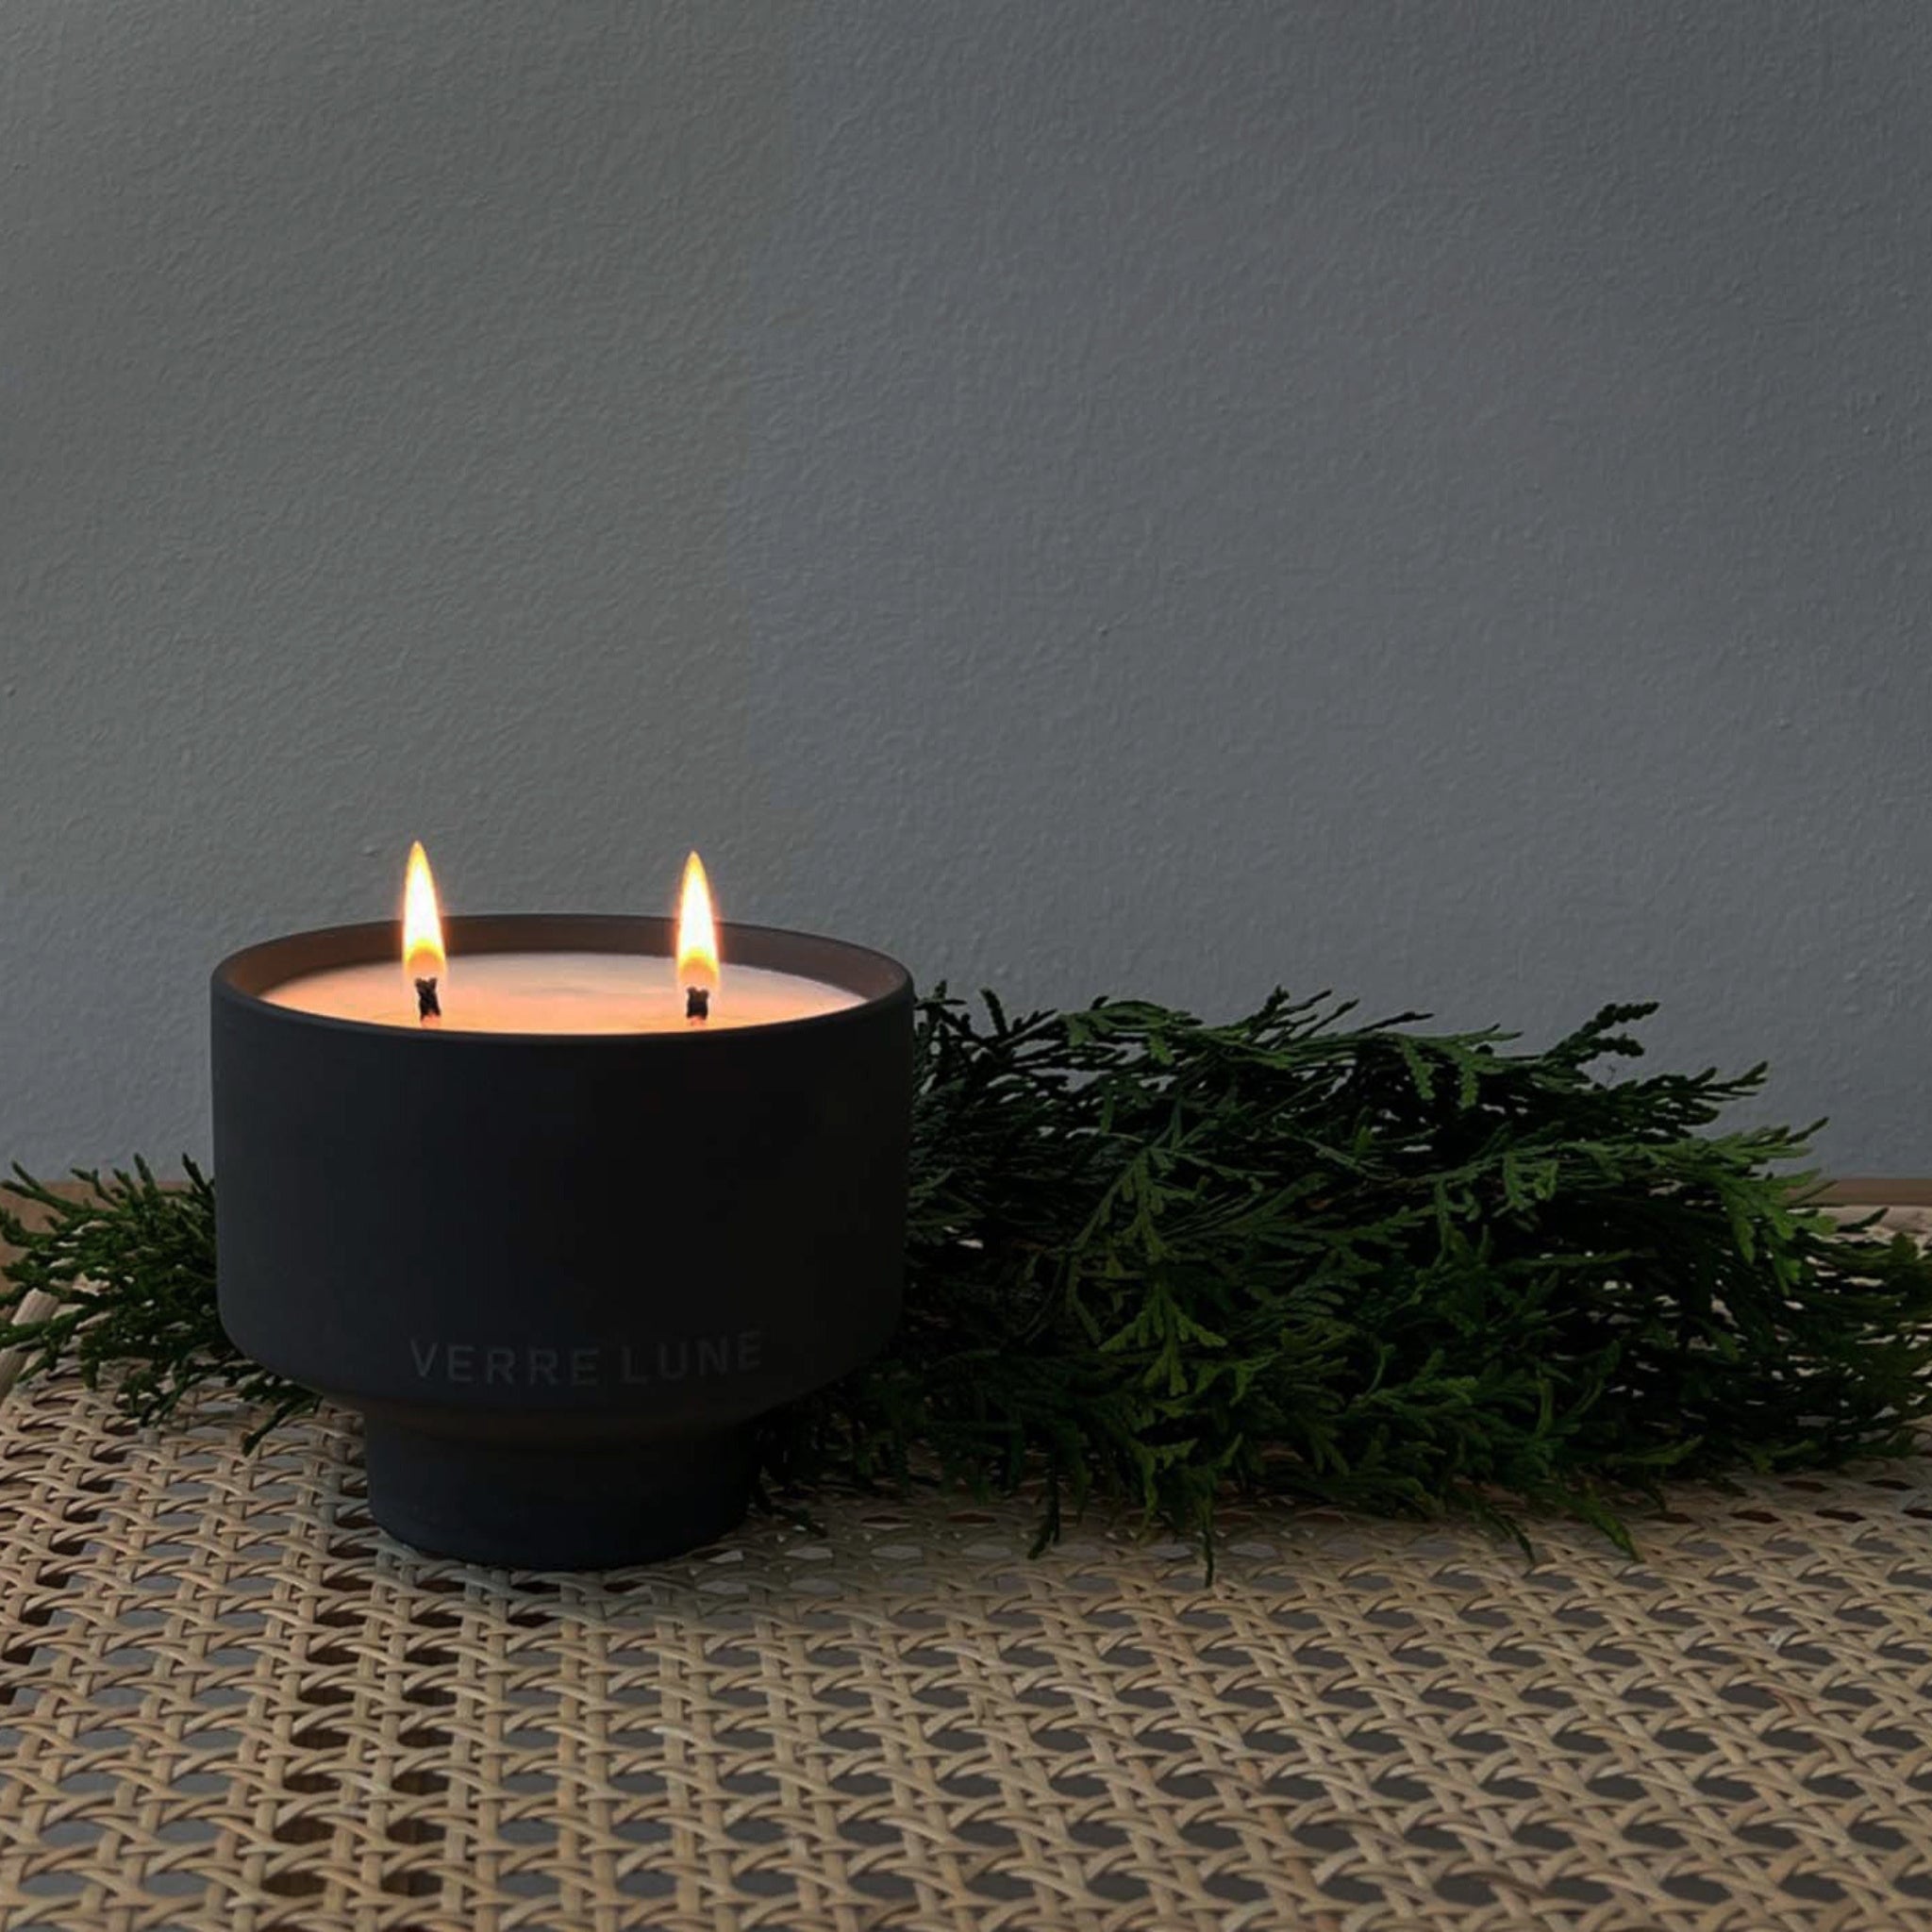 Lit Verre Lune off grid scented candle in a lounge calm setting